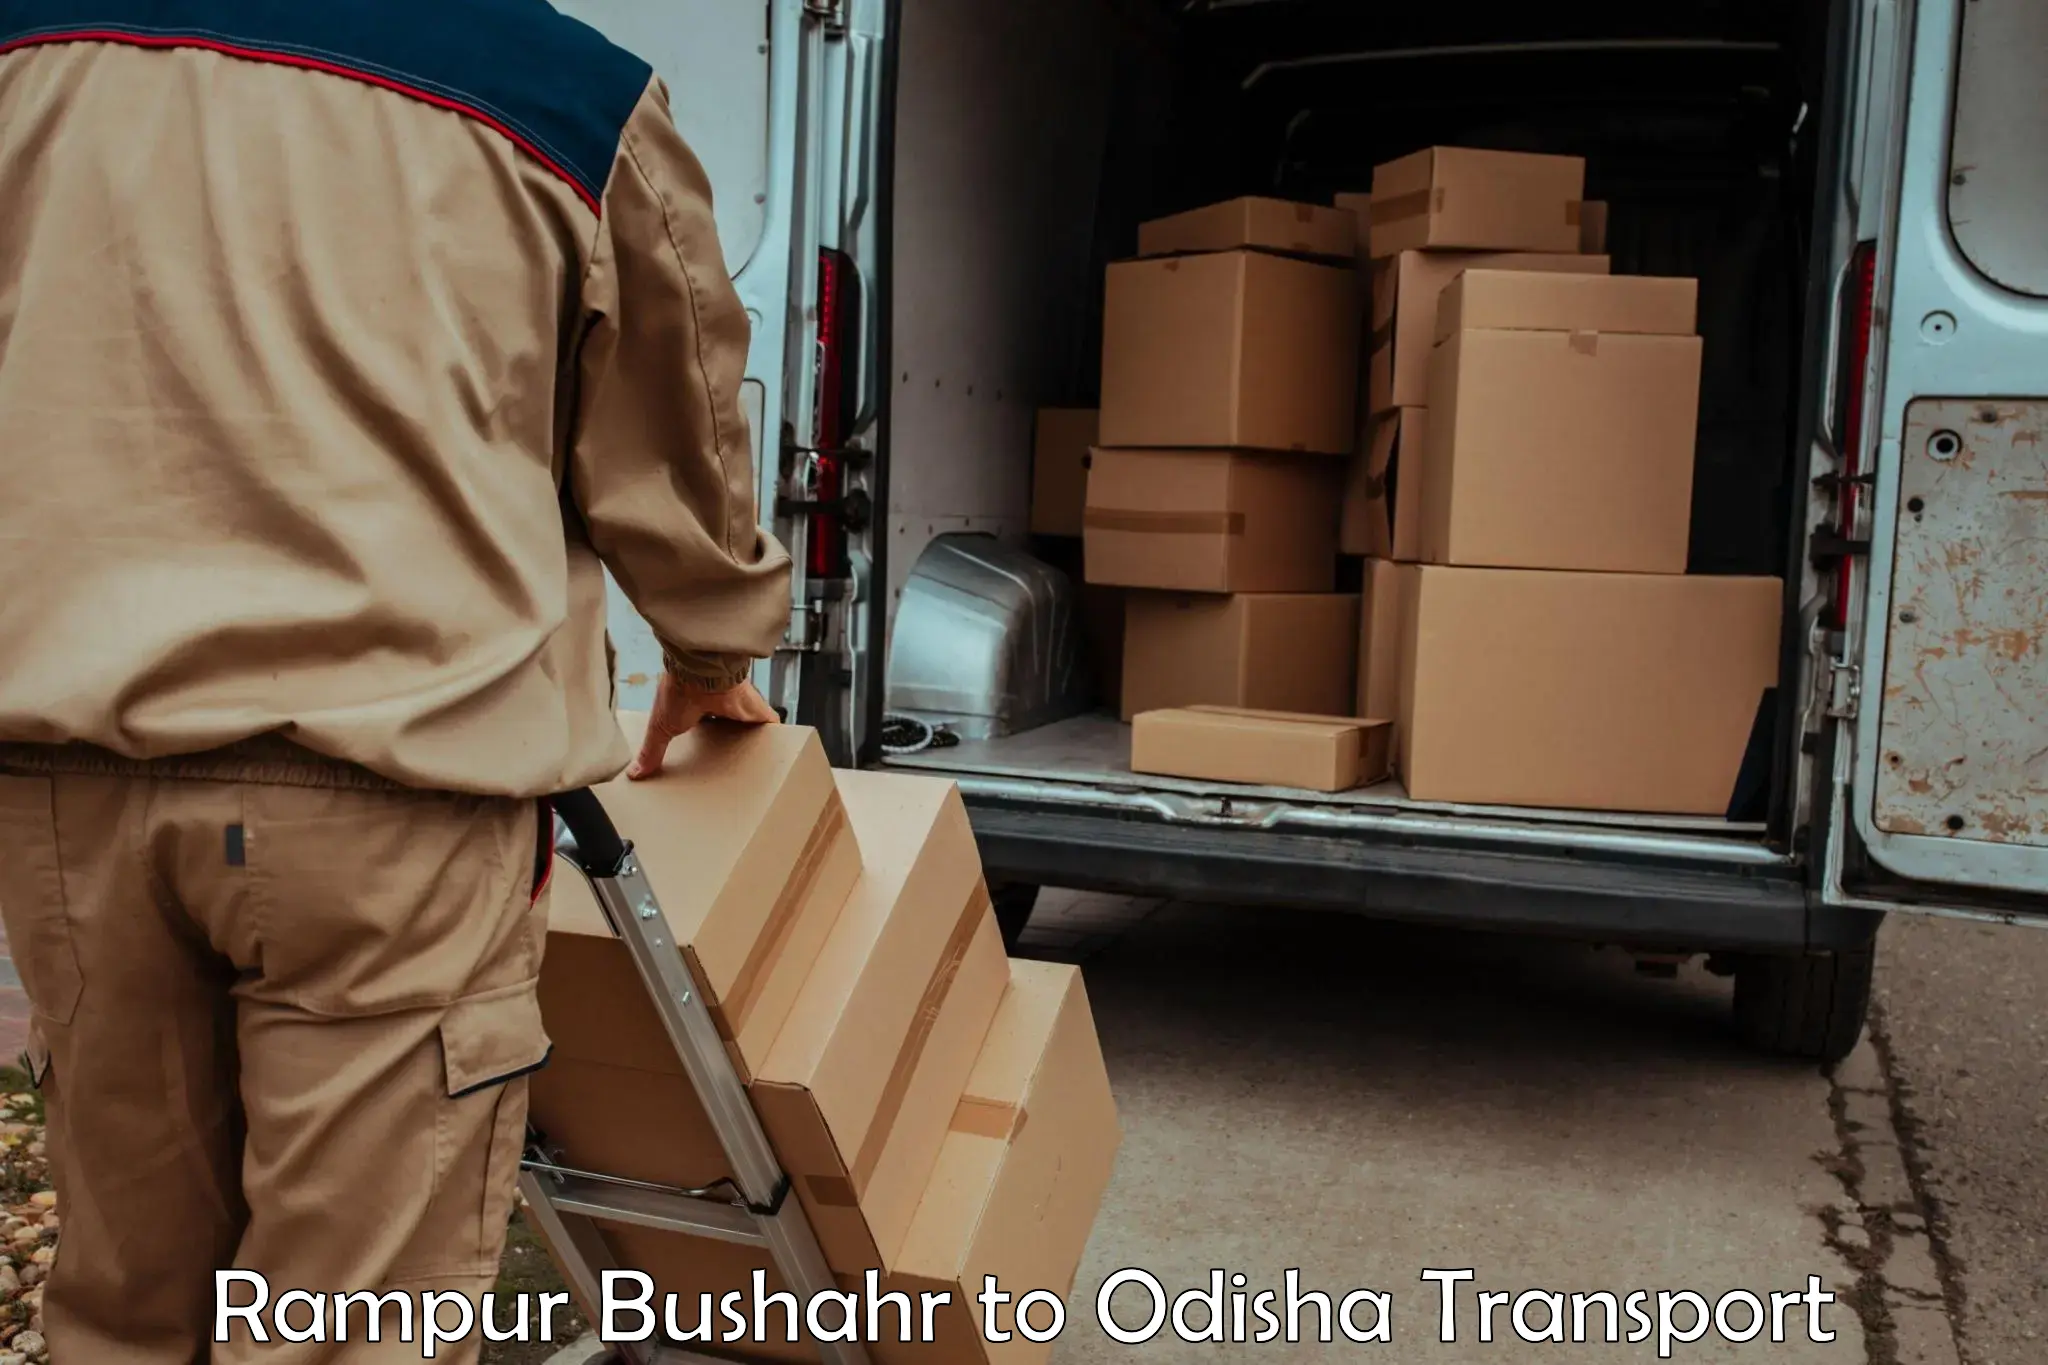 Part load transport service in India Rampur Bushahr to Baliapal